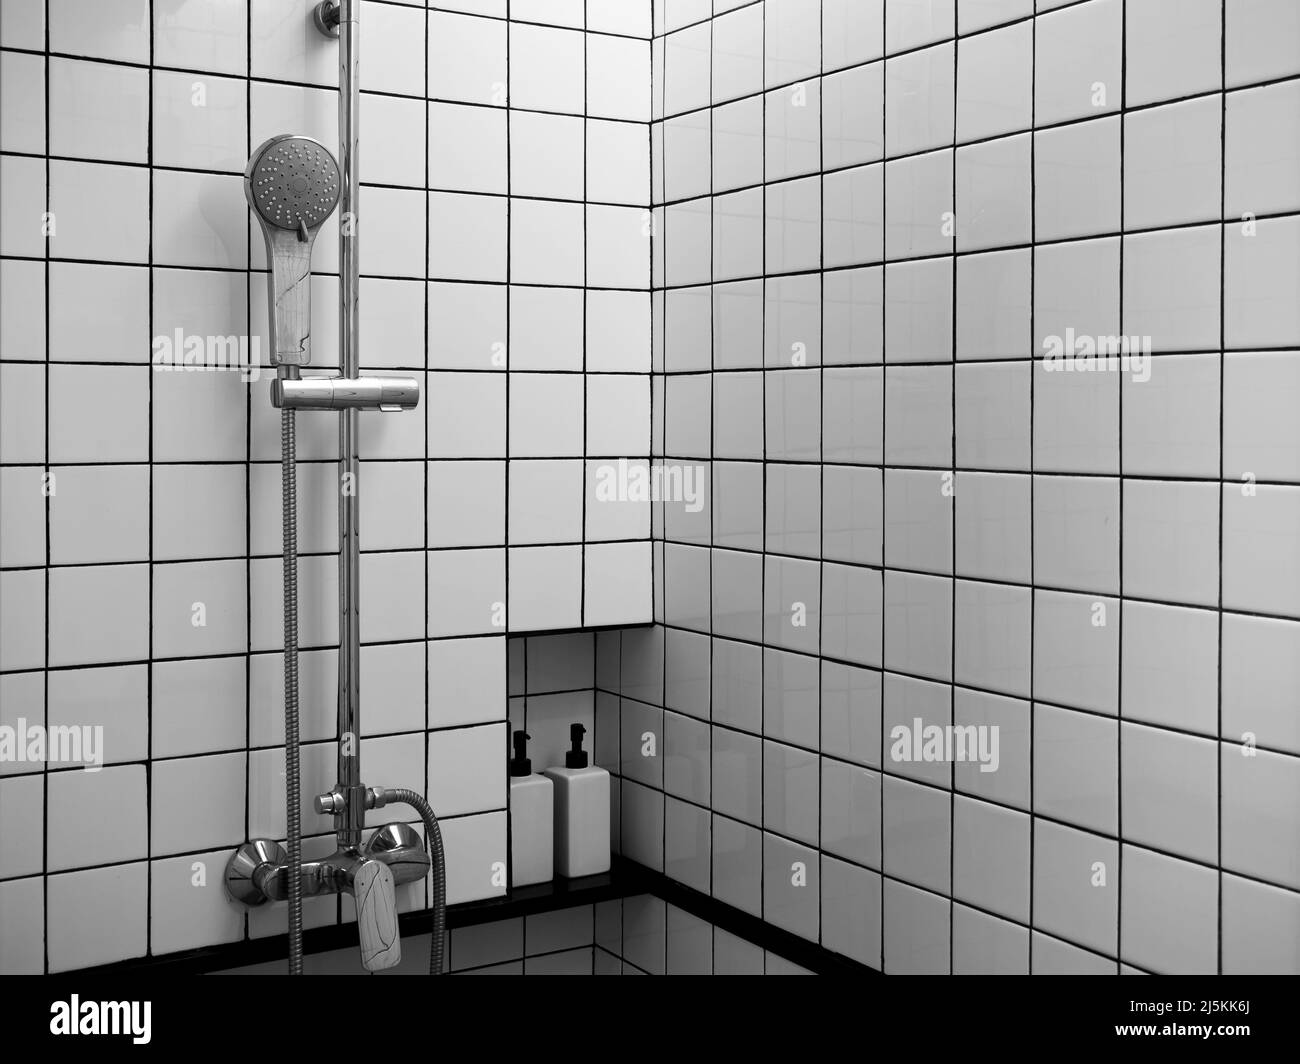 Chrome shower set on black and white grid tiles wall, the interior of modern shower room space box in the bathroom corner with copy space. Stock Photo